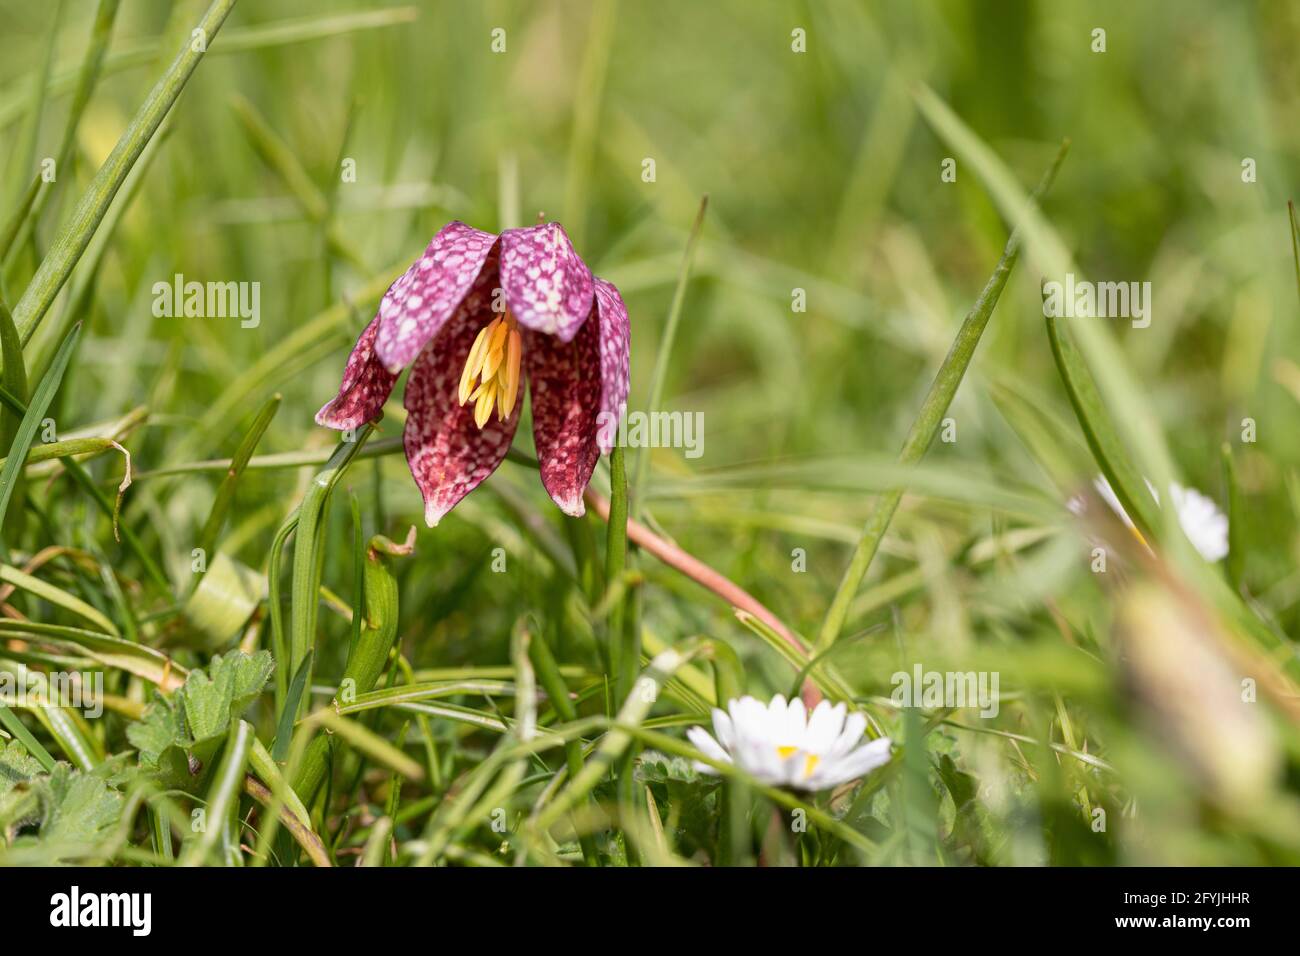 Close up of a Snake's head fritillary / Fritillaria Meleagris displaying its yellow anthers flowering during spring in England, UK Stock Photo